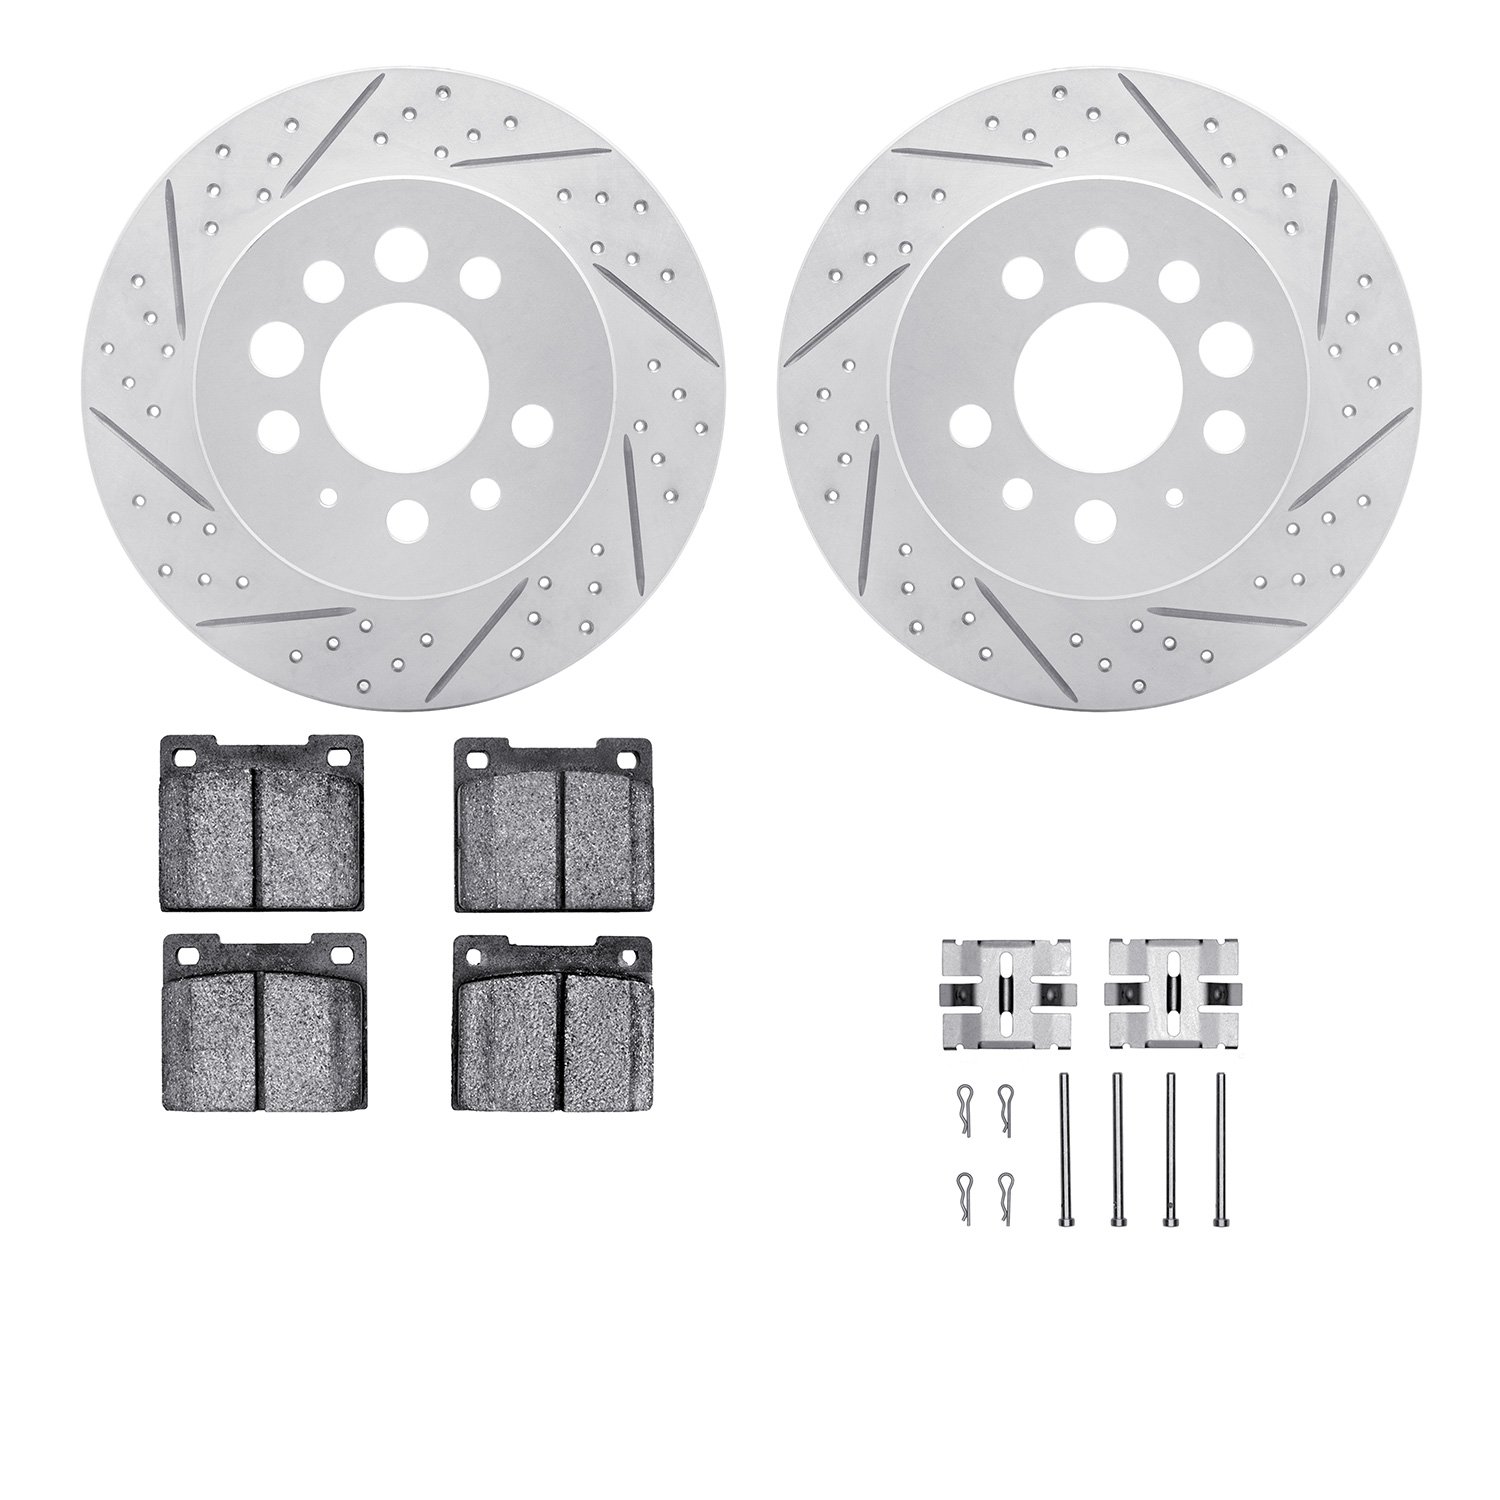 2512-27055 Geoperformance Drilled/Slotted Rotors w/5000 Advanced Brake Pads Kit & Hardware, 1975-1987 Volvo, Position: Rear